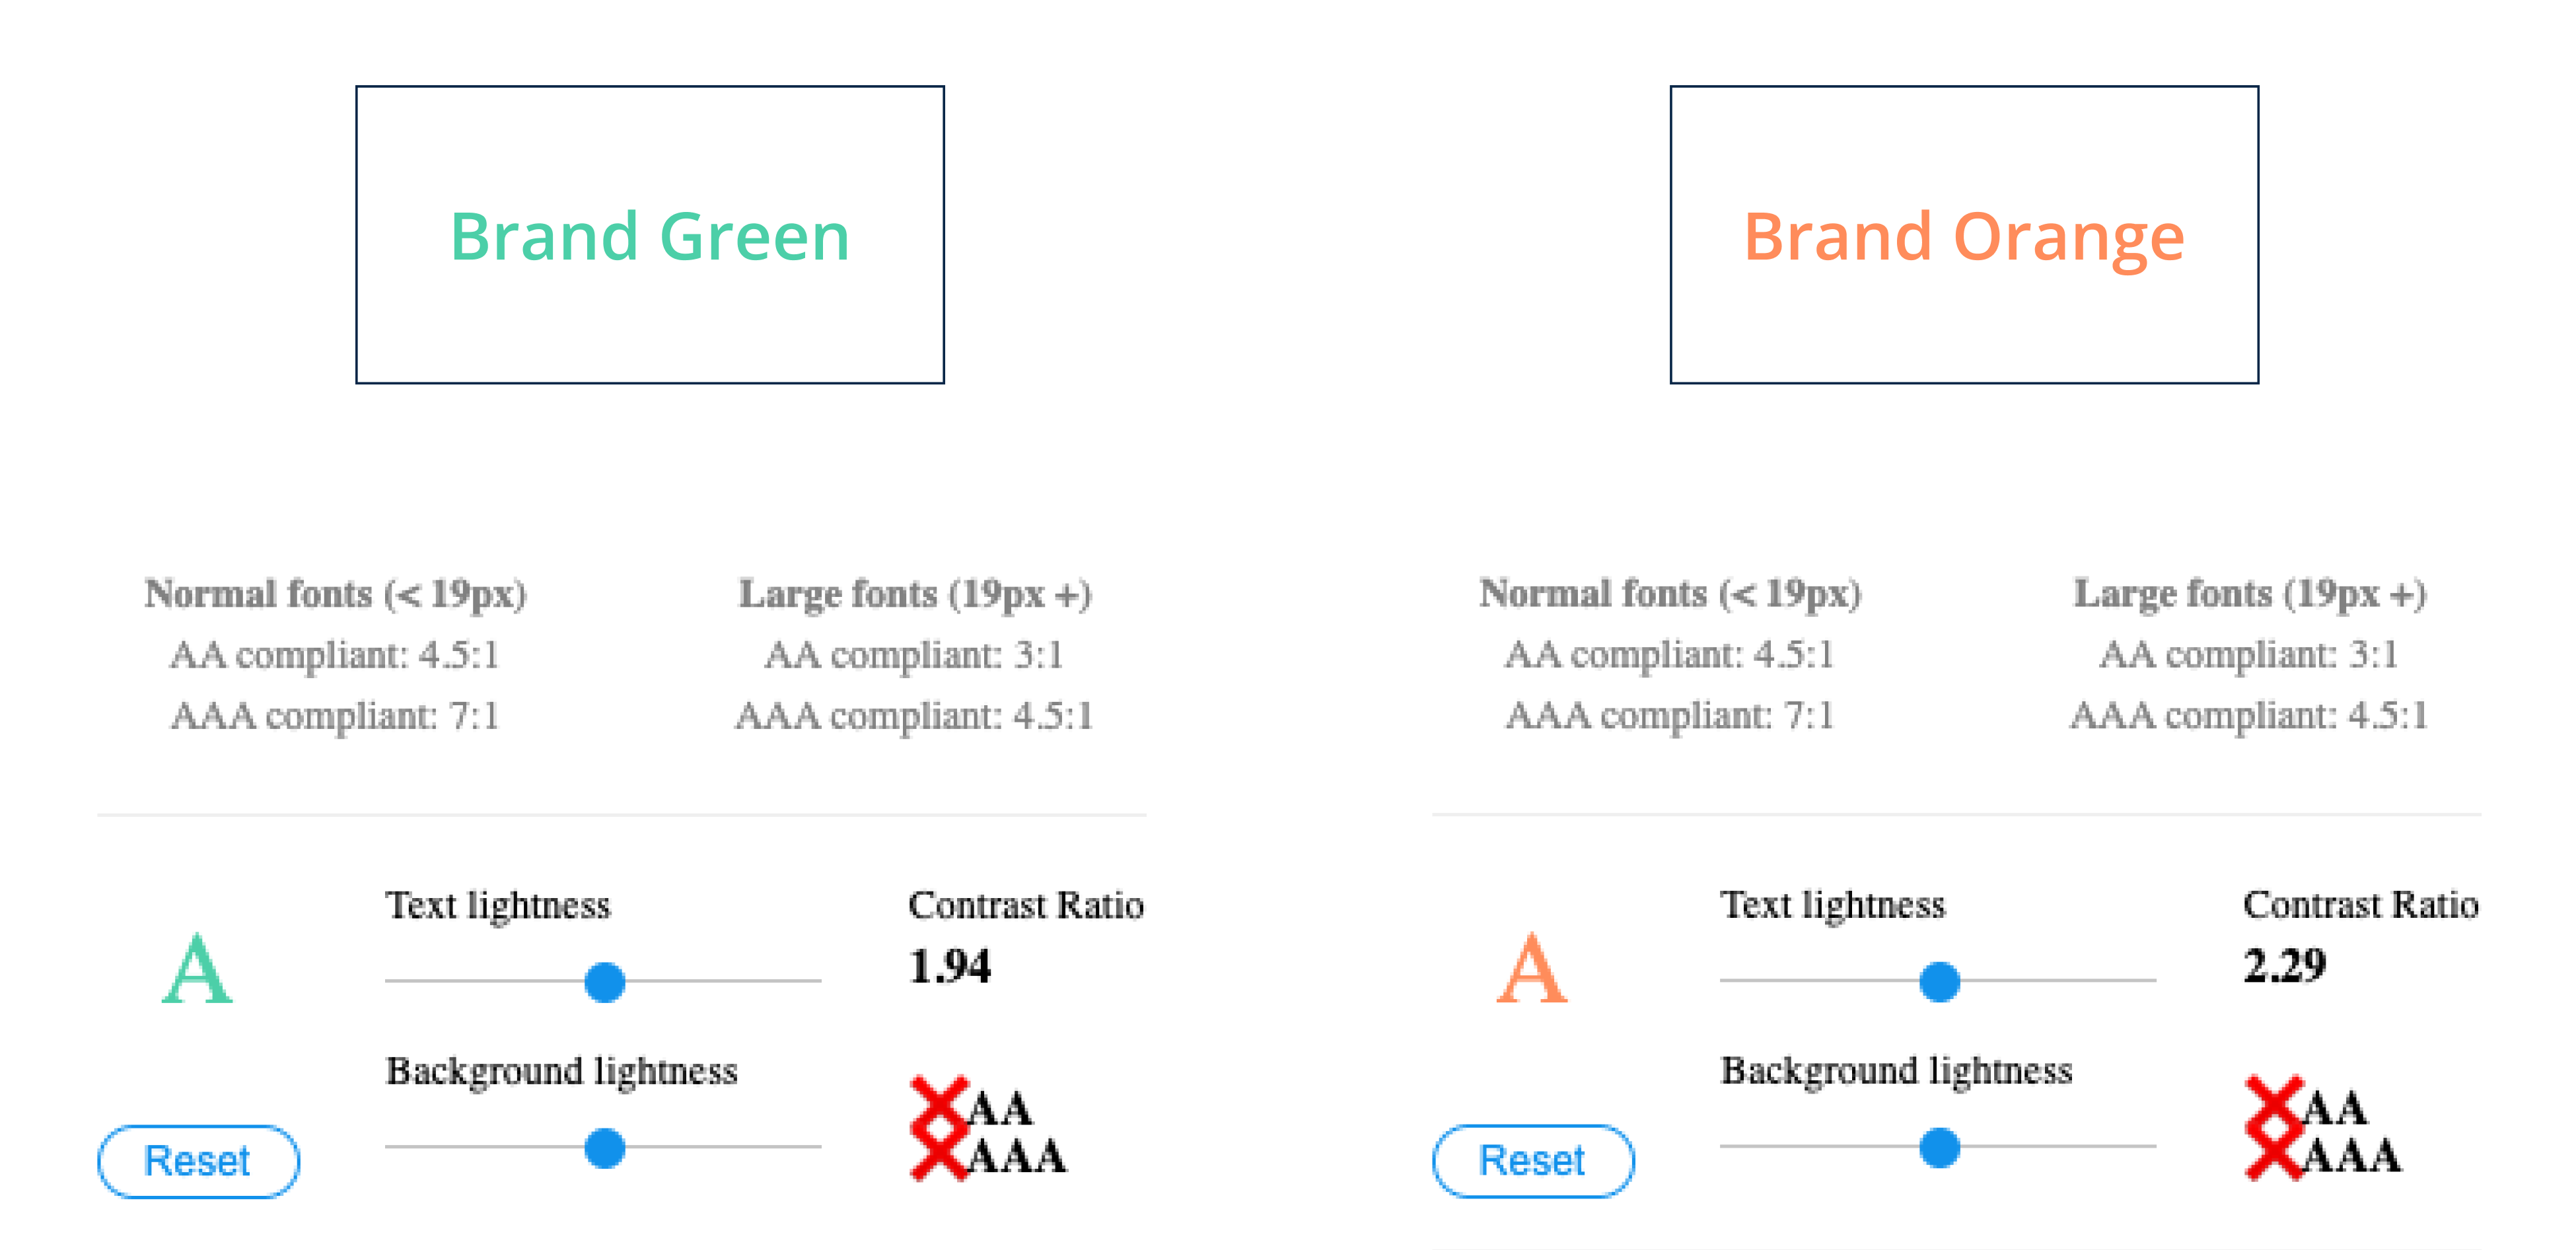 A side-by-side comparison of Vendia's old brand colors, Brand Green and Brand Orange